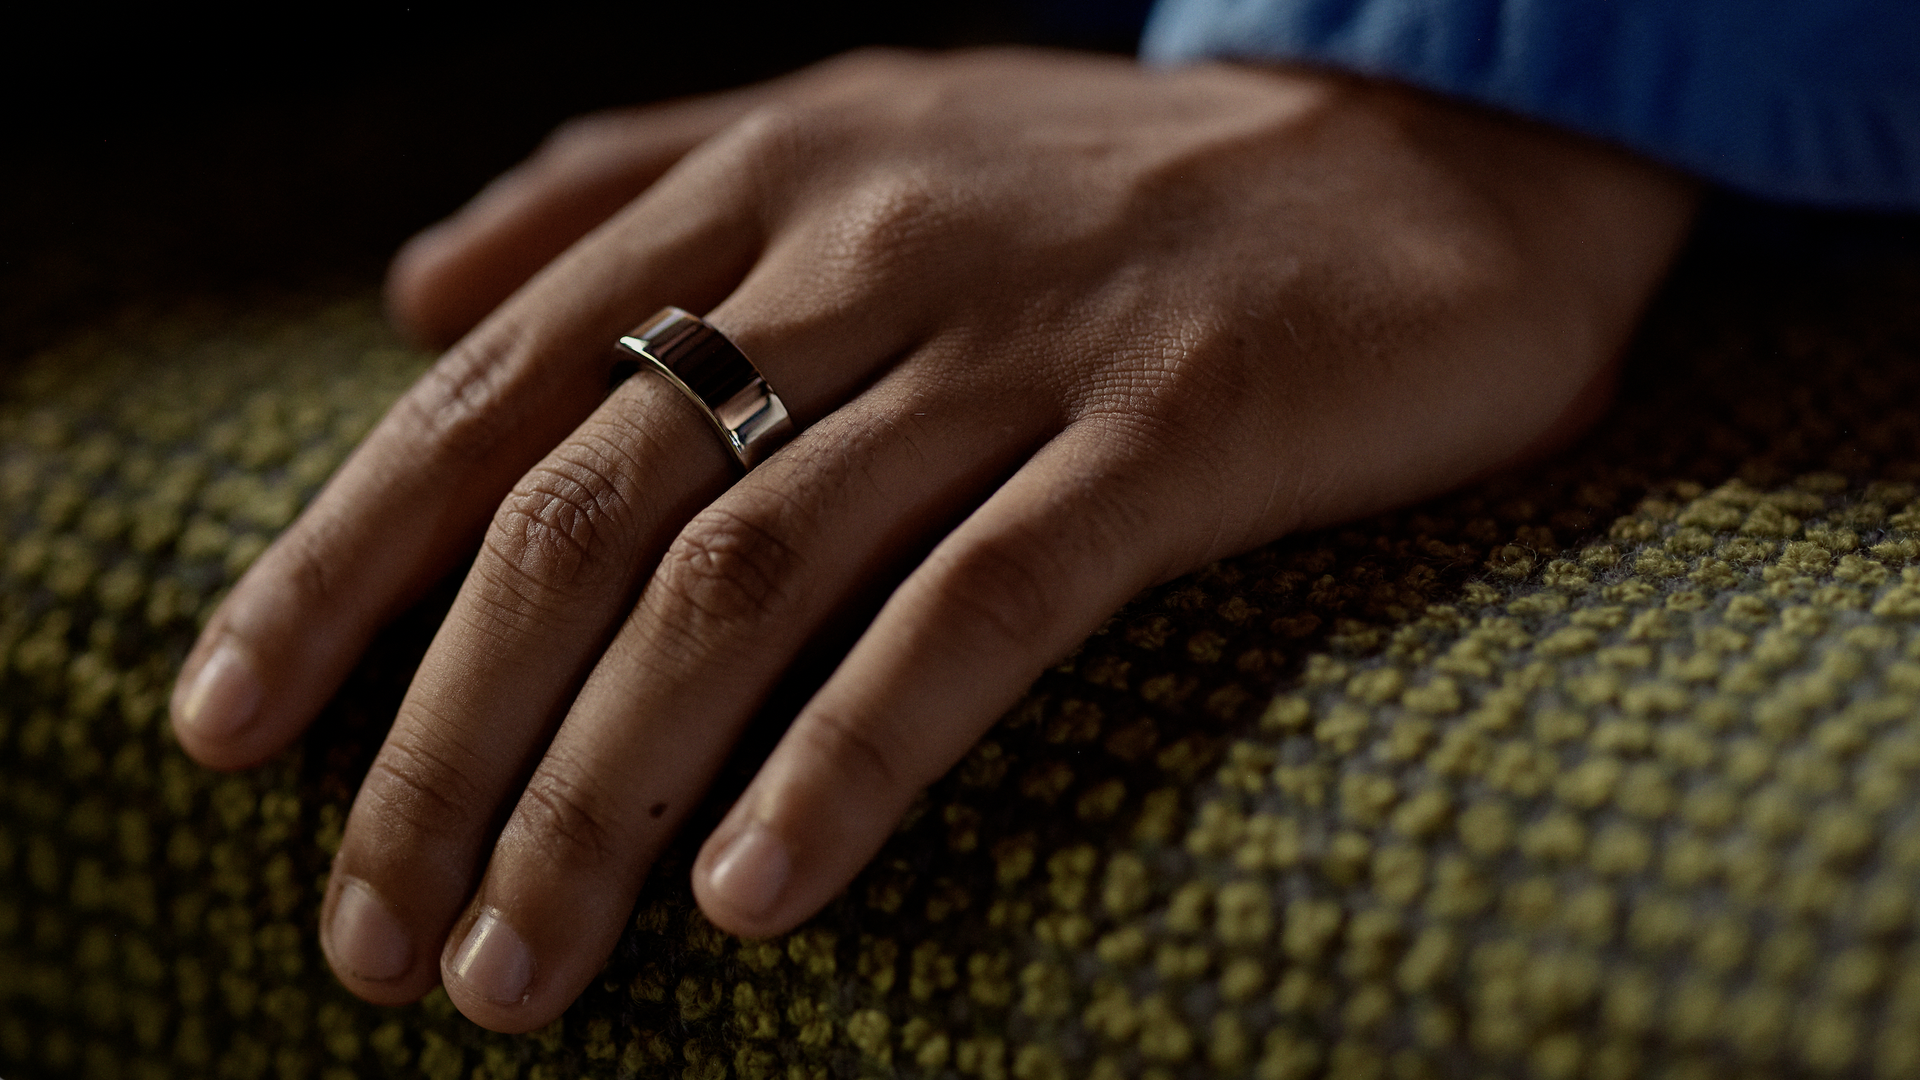 Oura's latest fitness ring, seen here, adds period tracking among other features.